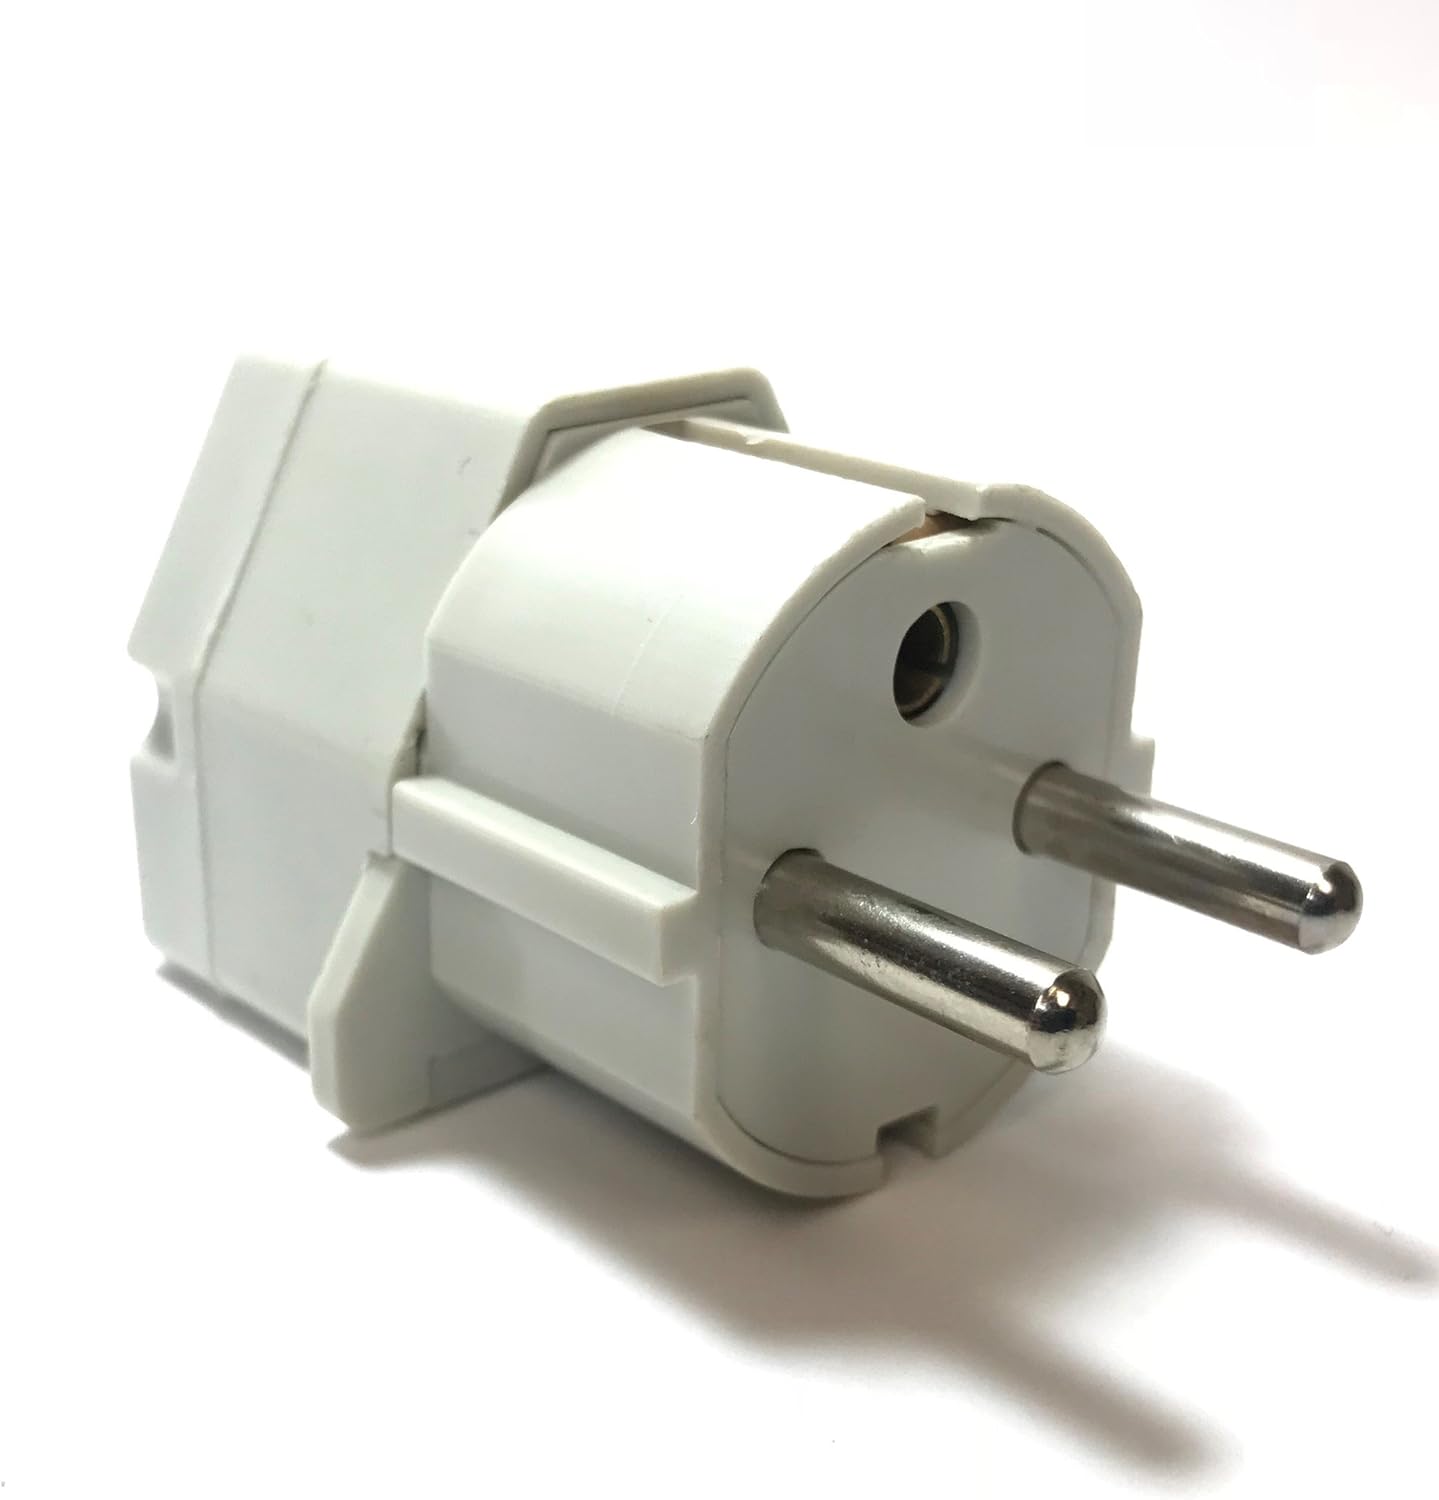 Type F Grounded Universal Plug Adapter for Germany Austria